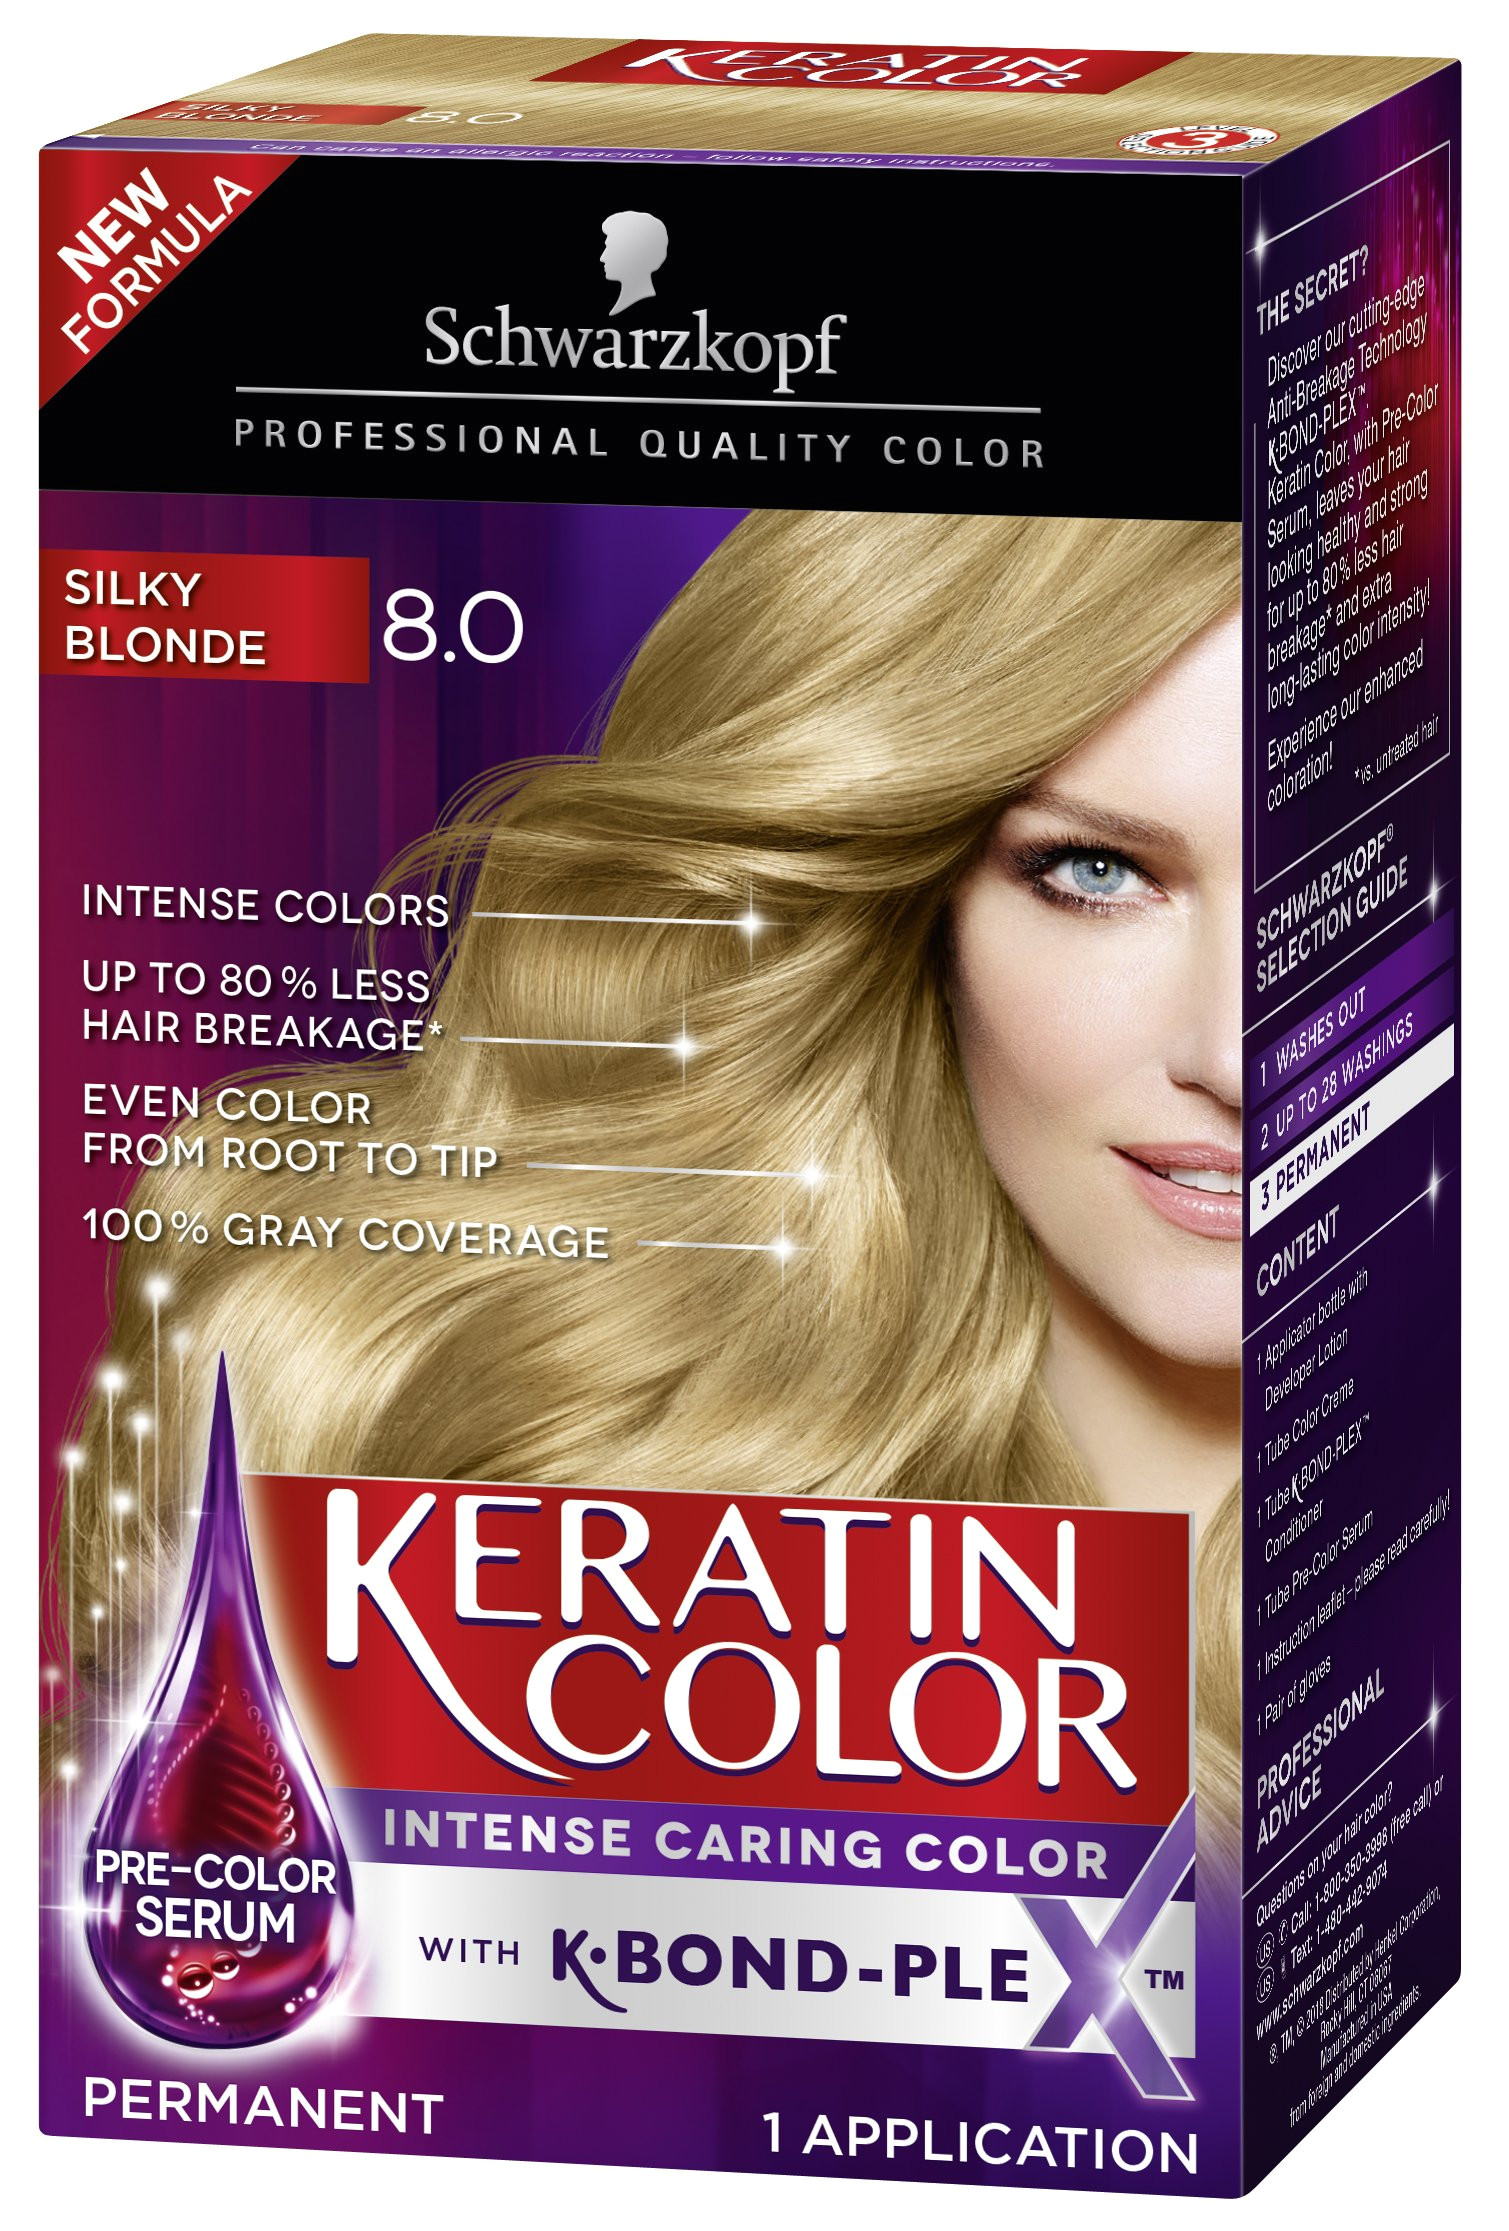 amazon com schwarzkopf keratin color anti age hair color cream 8 0 silky blonde packaging may vary beauty